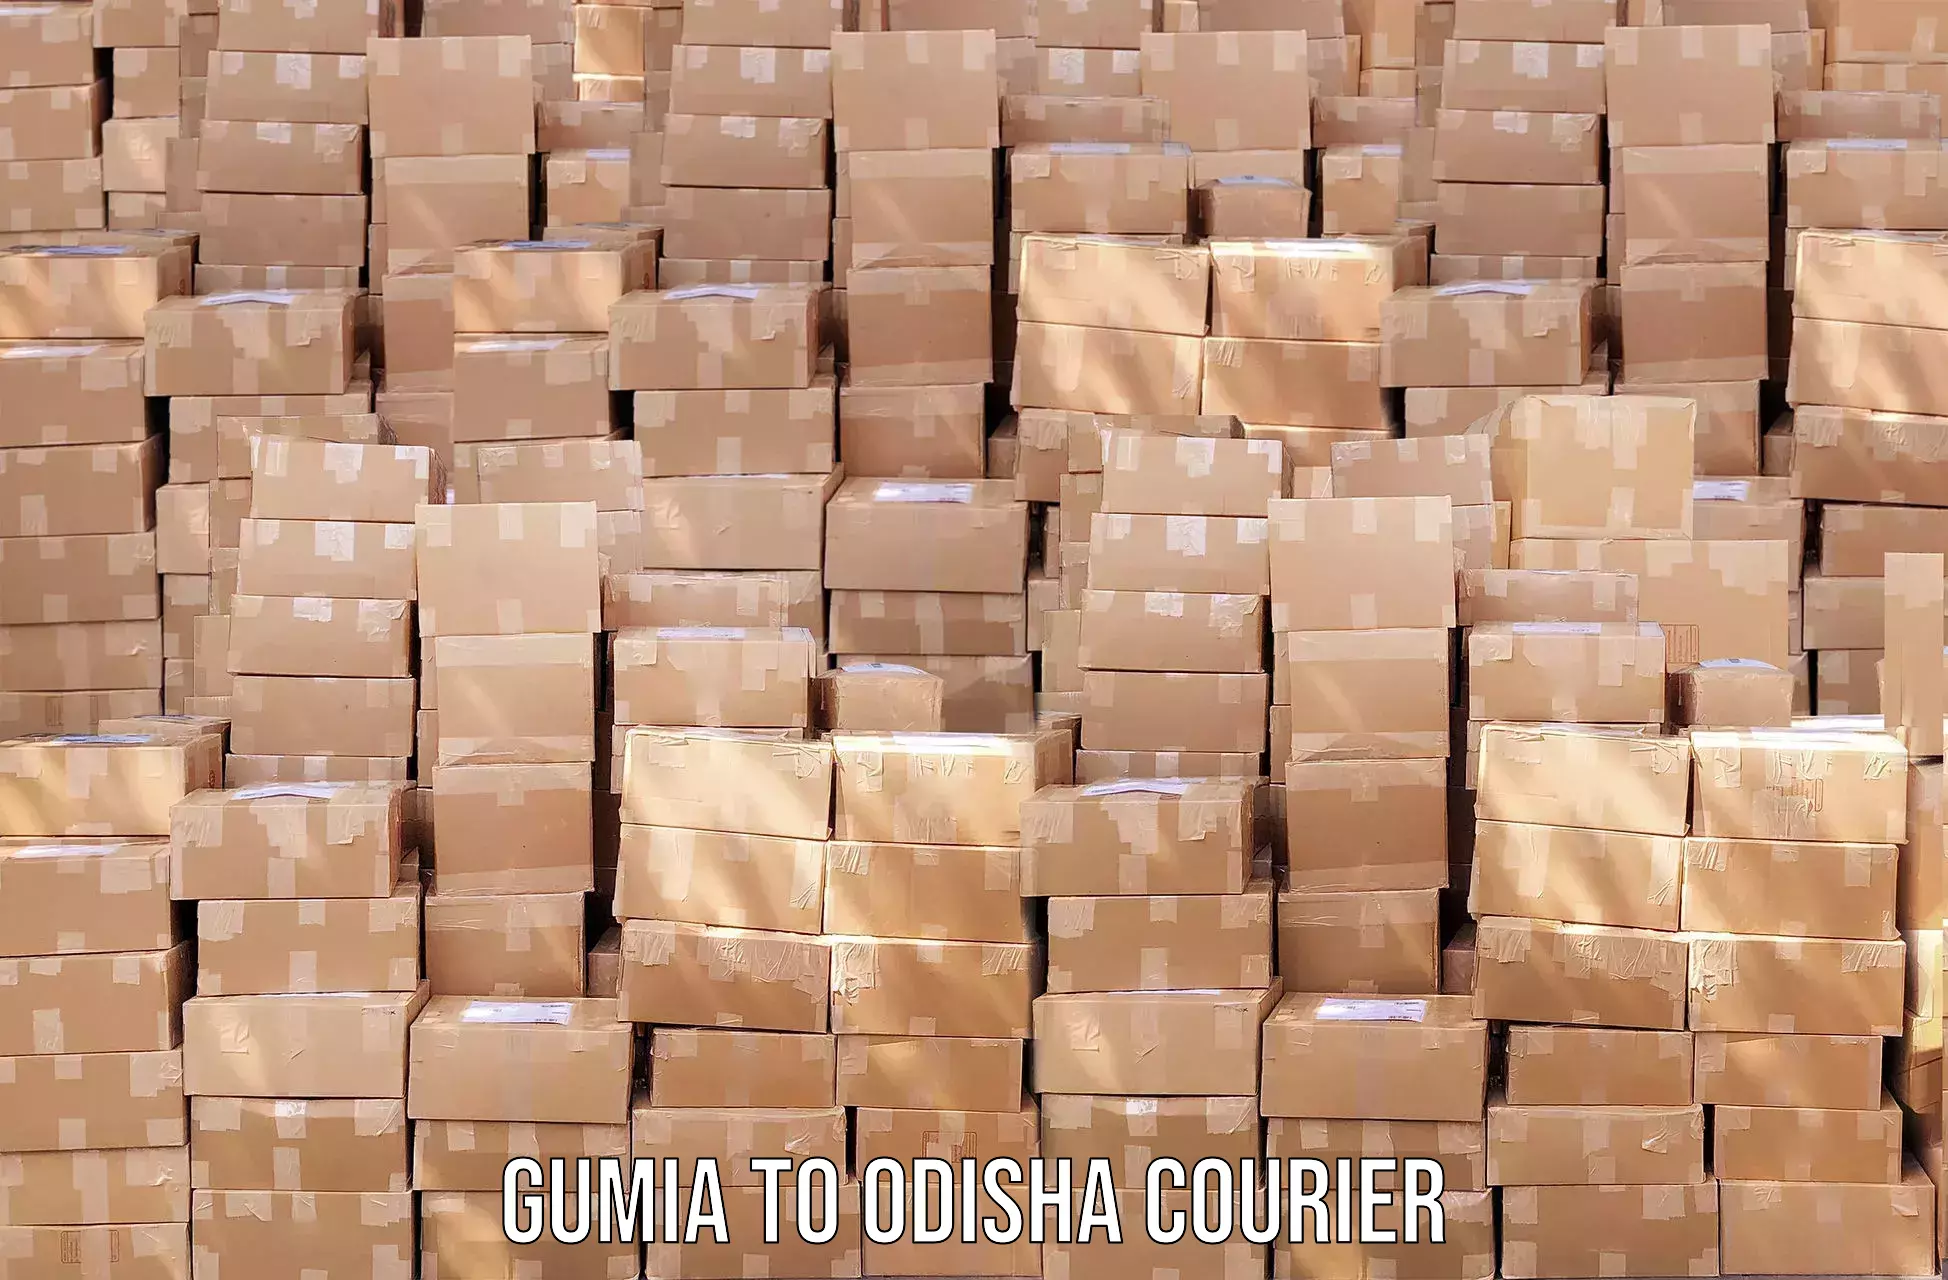 Courier app Gumia to Sankerko